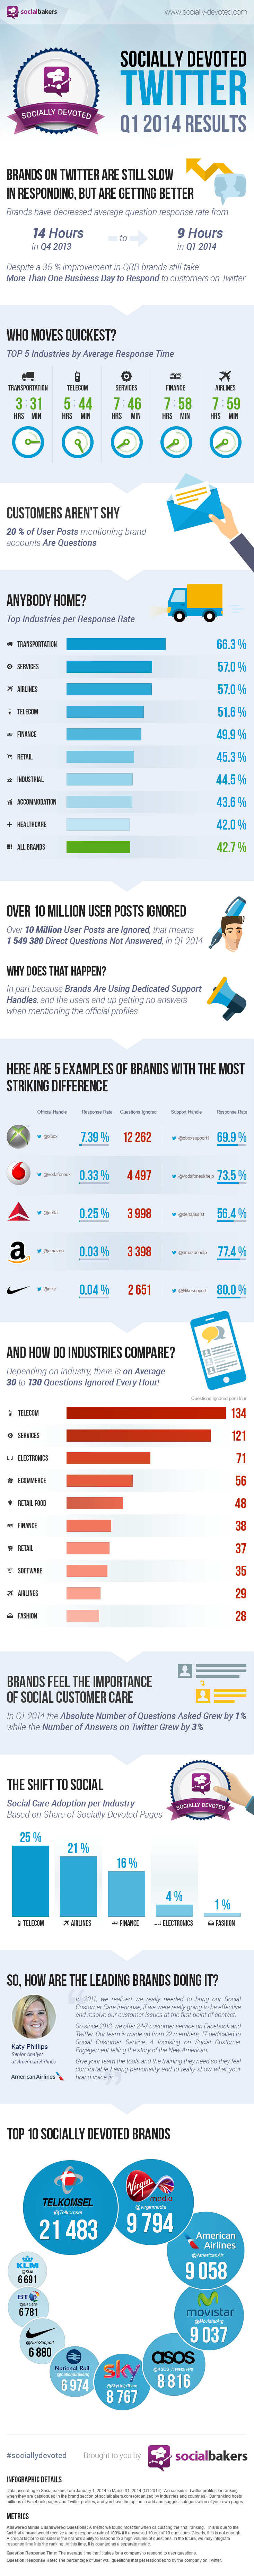 Infographie 110 - sociallydevoted-q1-2014-twitter